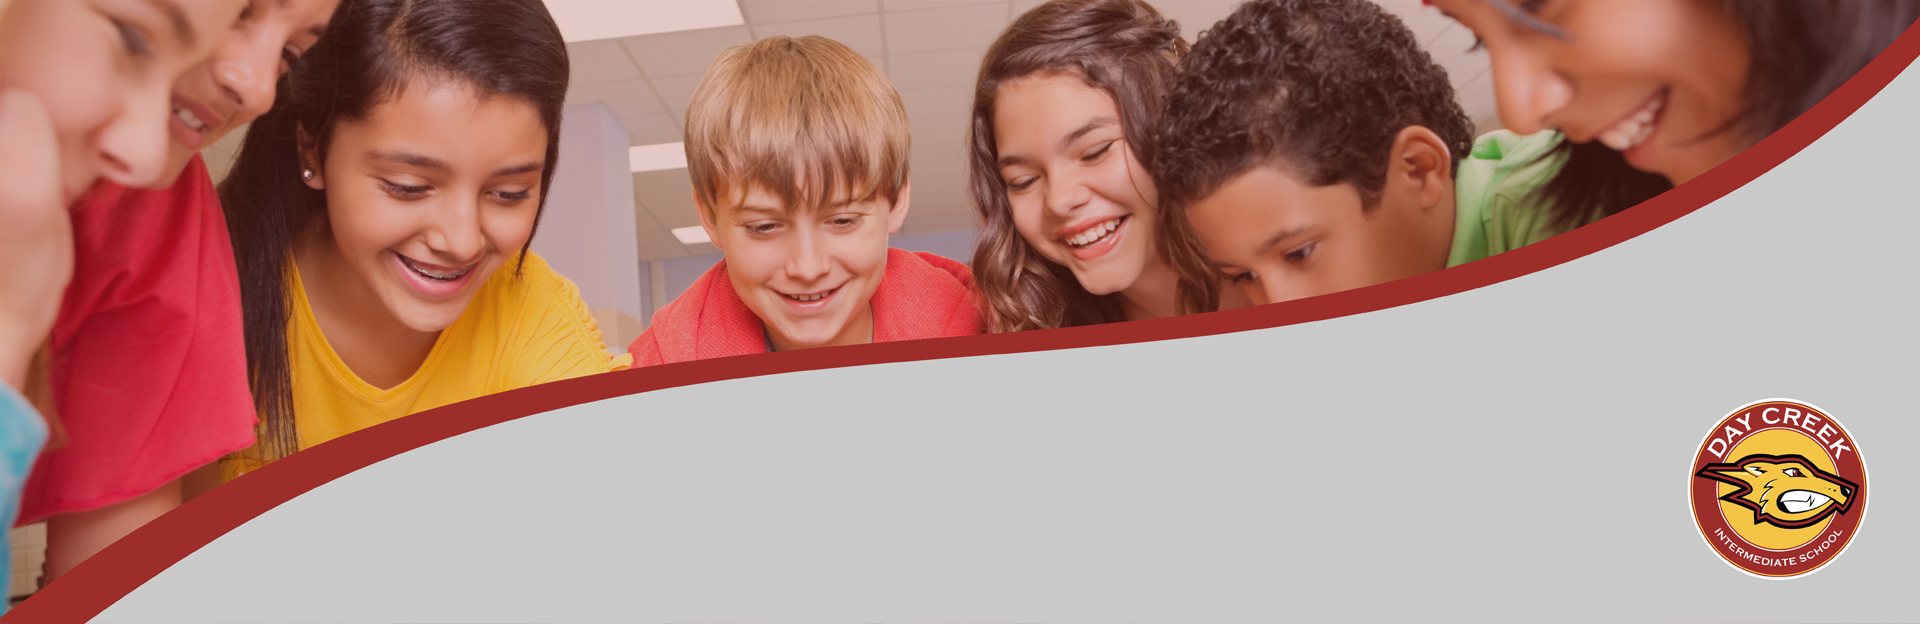 Students smiling and school logo